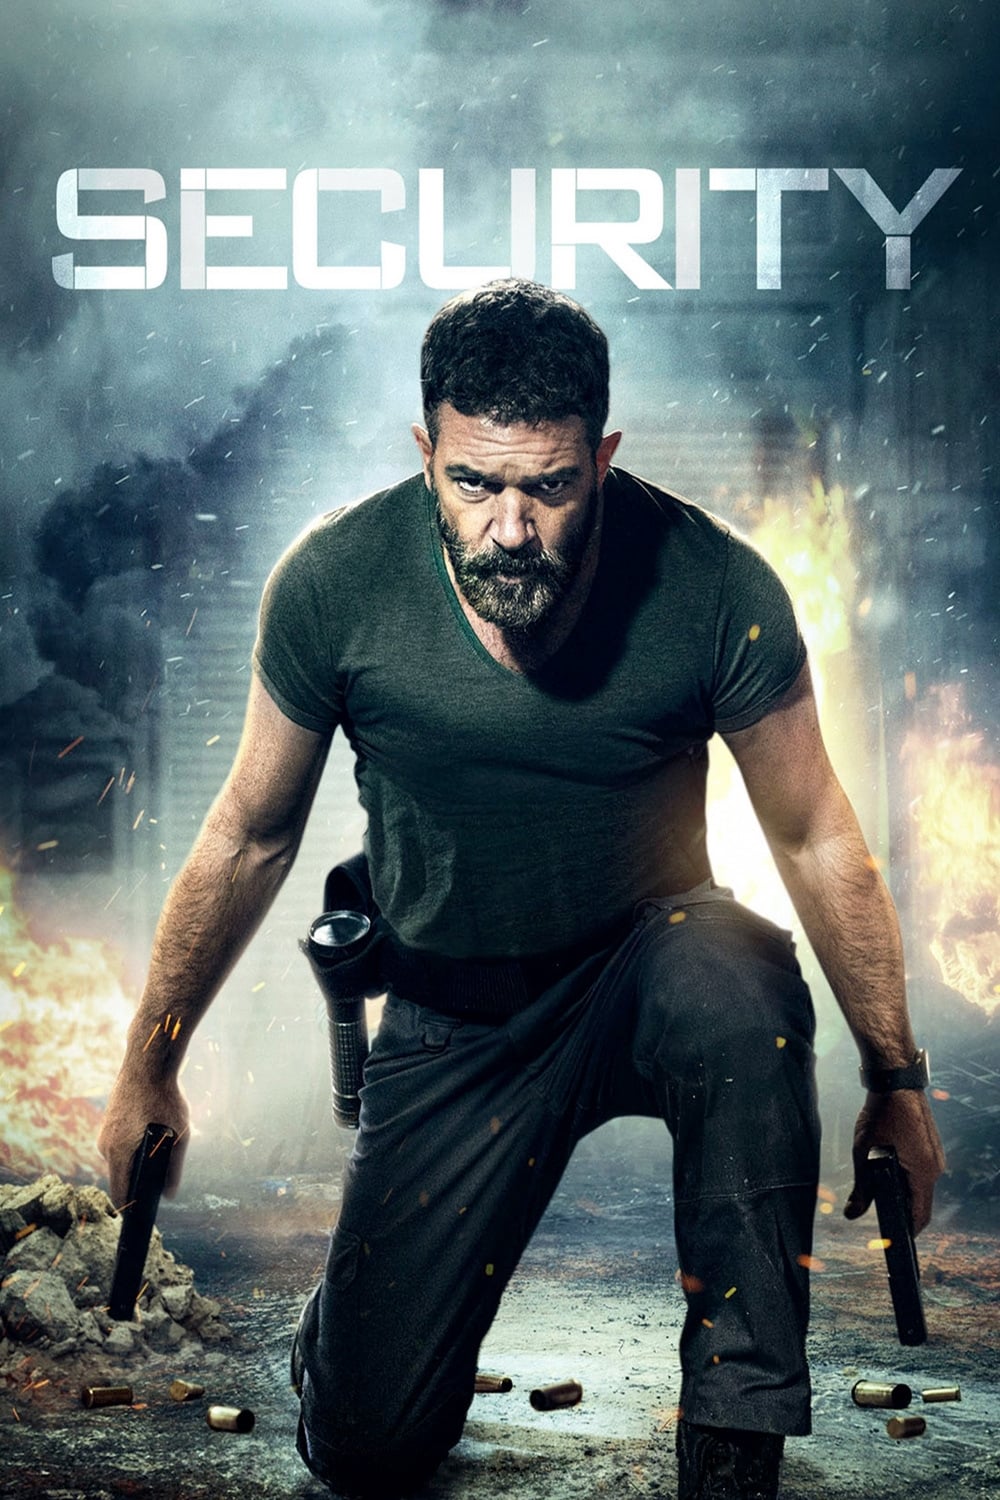 Security [HD] (2017)